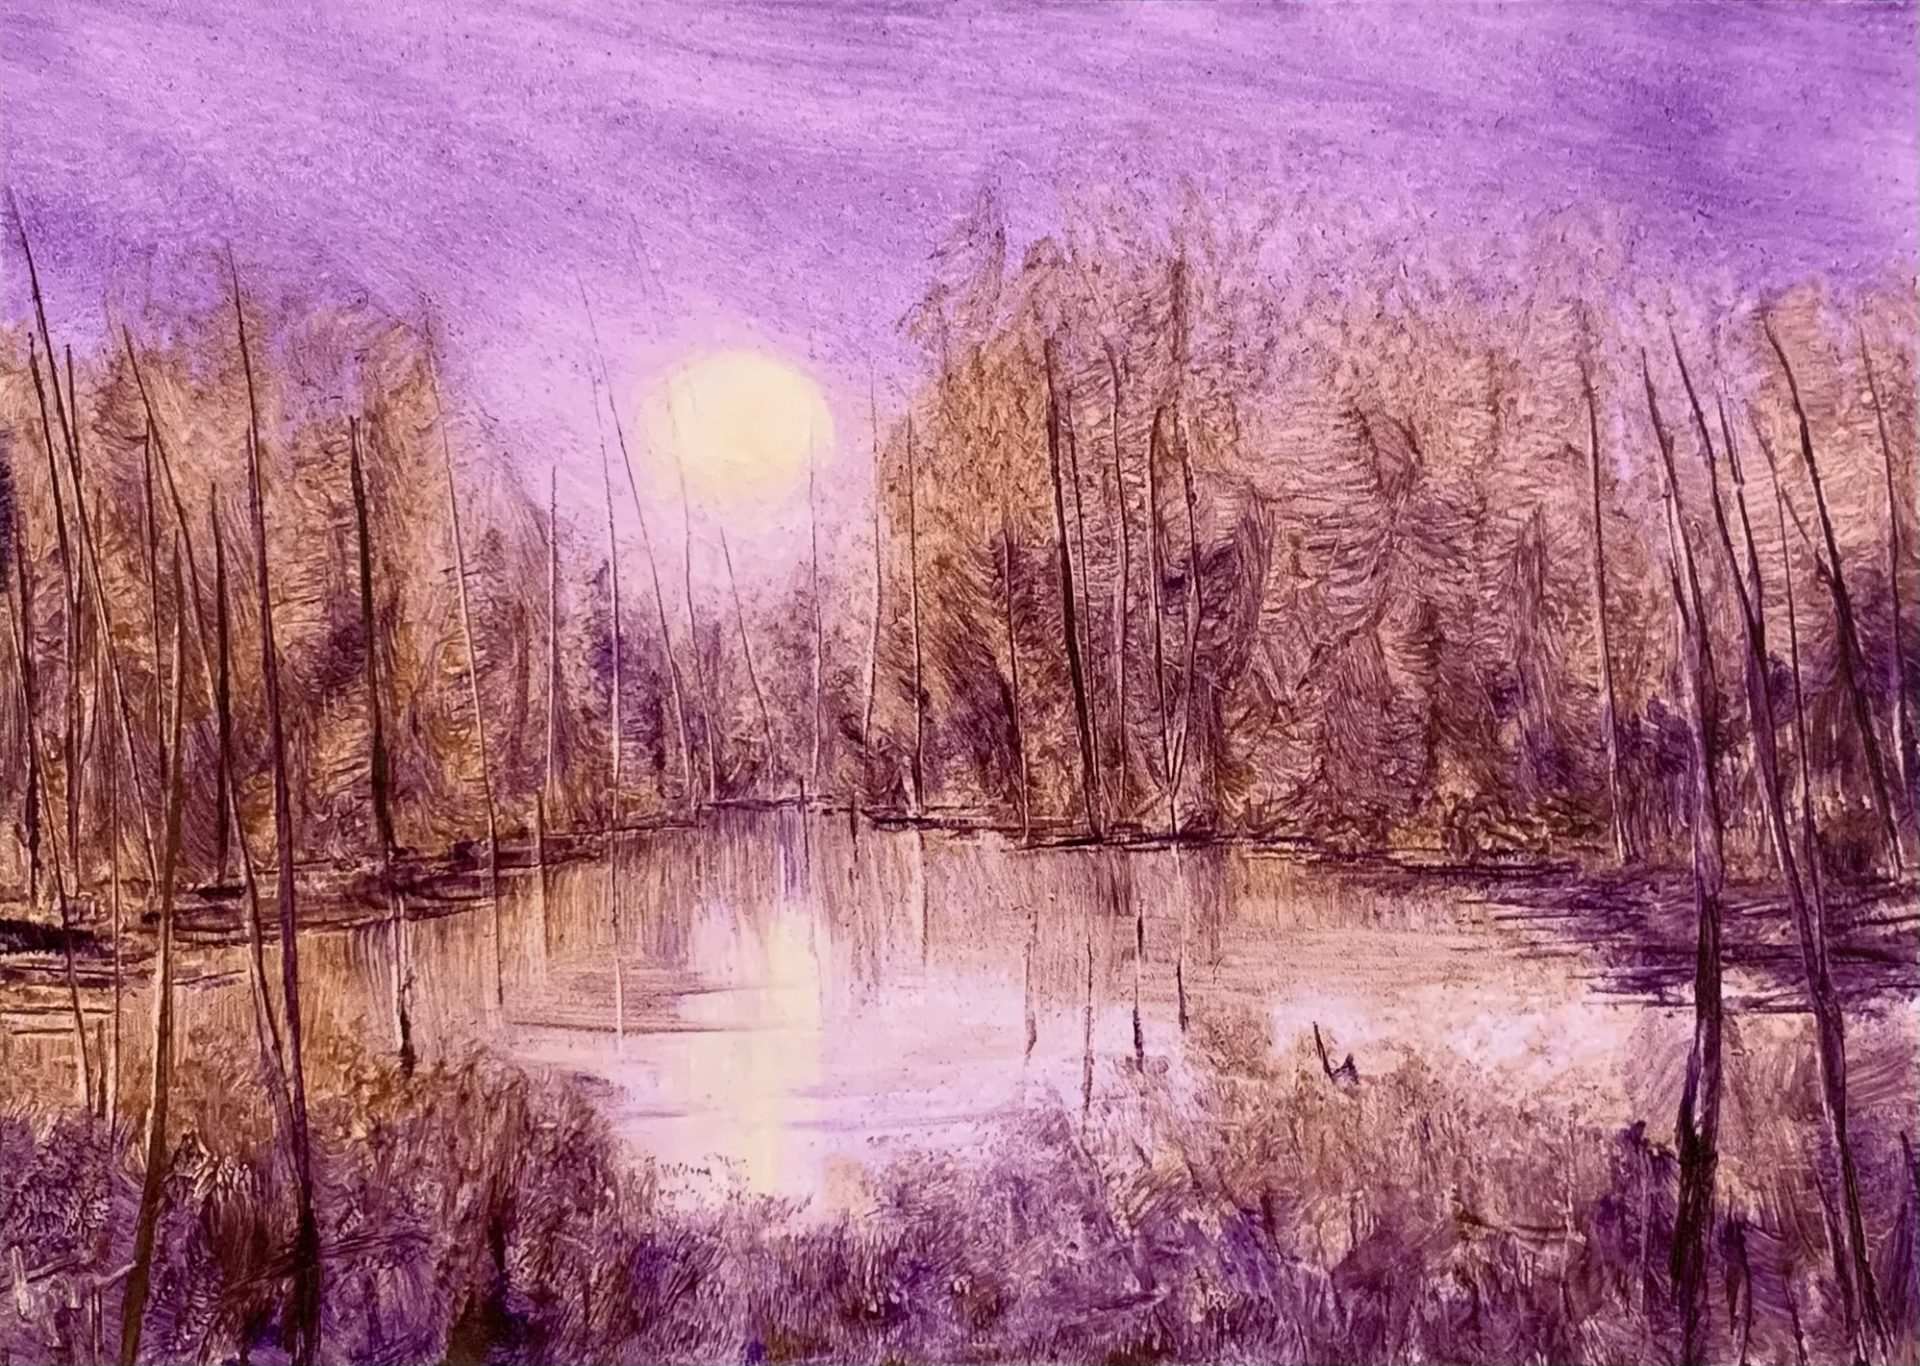 Original landscape oil painting by Tisha Mark, Week 6, 52 Weeks of Finding Light Series, 5"x7" oil on gessobord (2023). This nocturne painting features a full moon rising over a treeline and reflecting in a body of water. Painted in a limited palette of purple tones with ochre and light yellow.